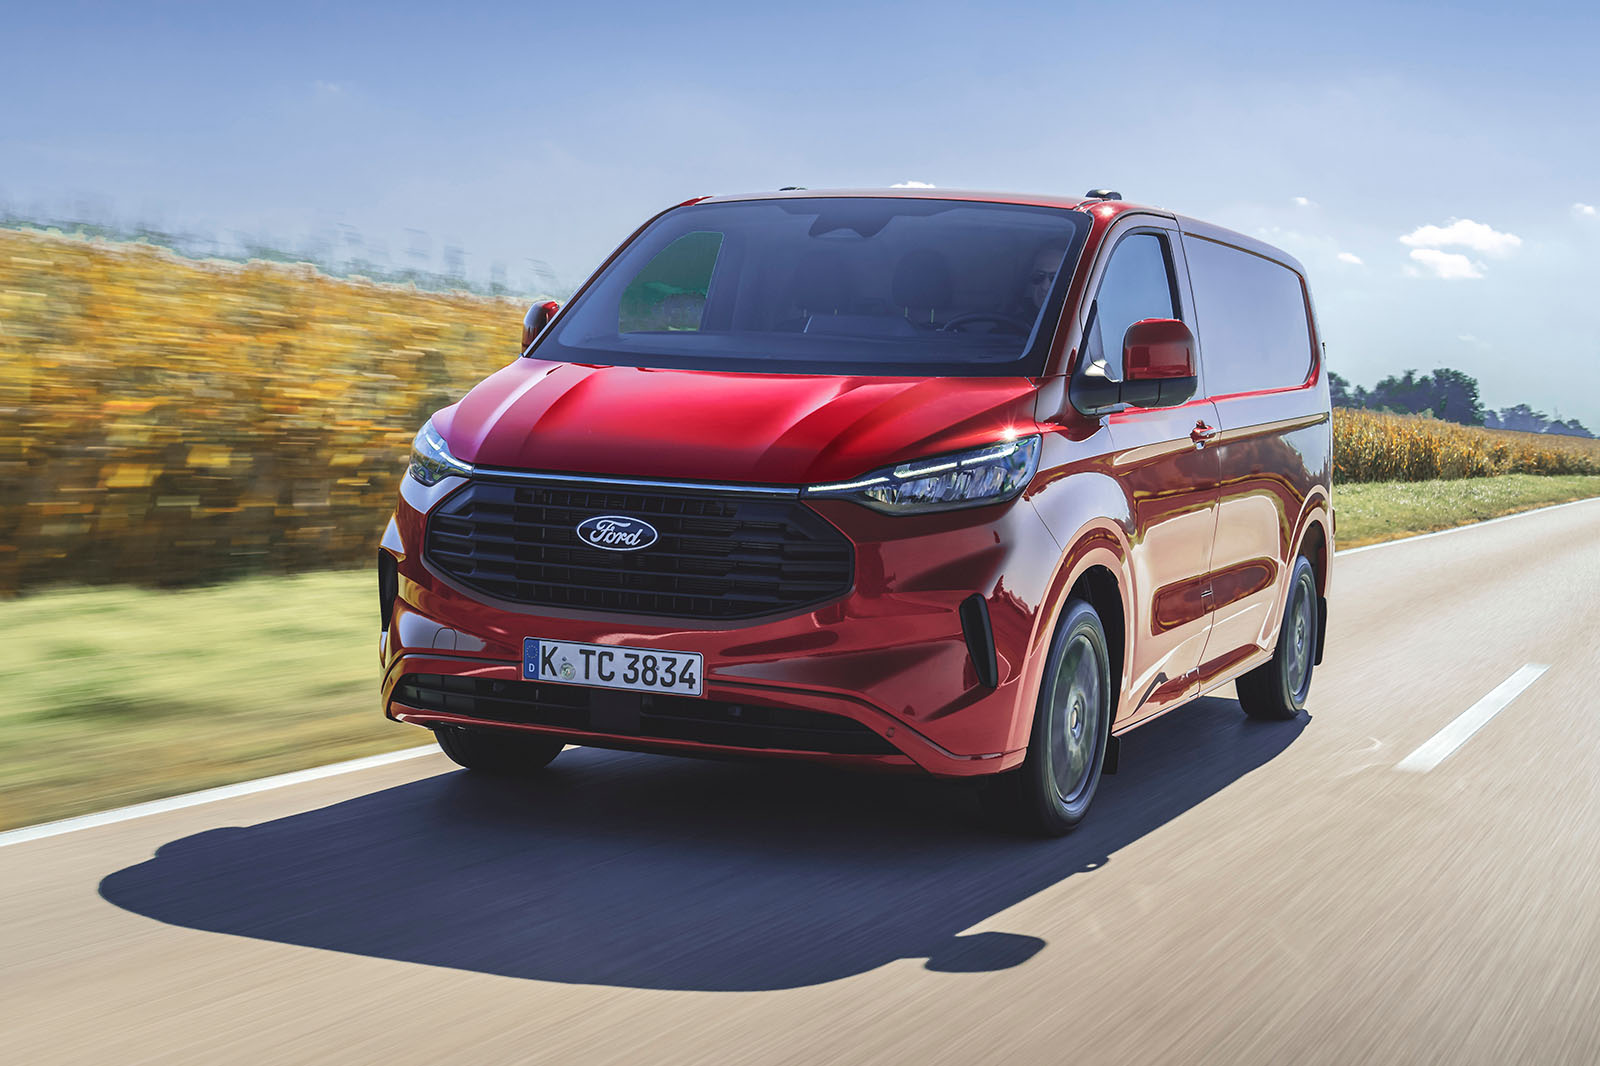 https://www.autocar.co.uk/sites/autocar.co.uk/files/ford-transit-review-2023-01-tracking-front.jpg